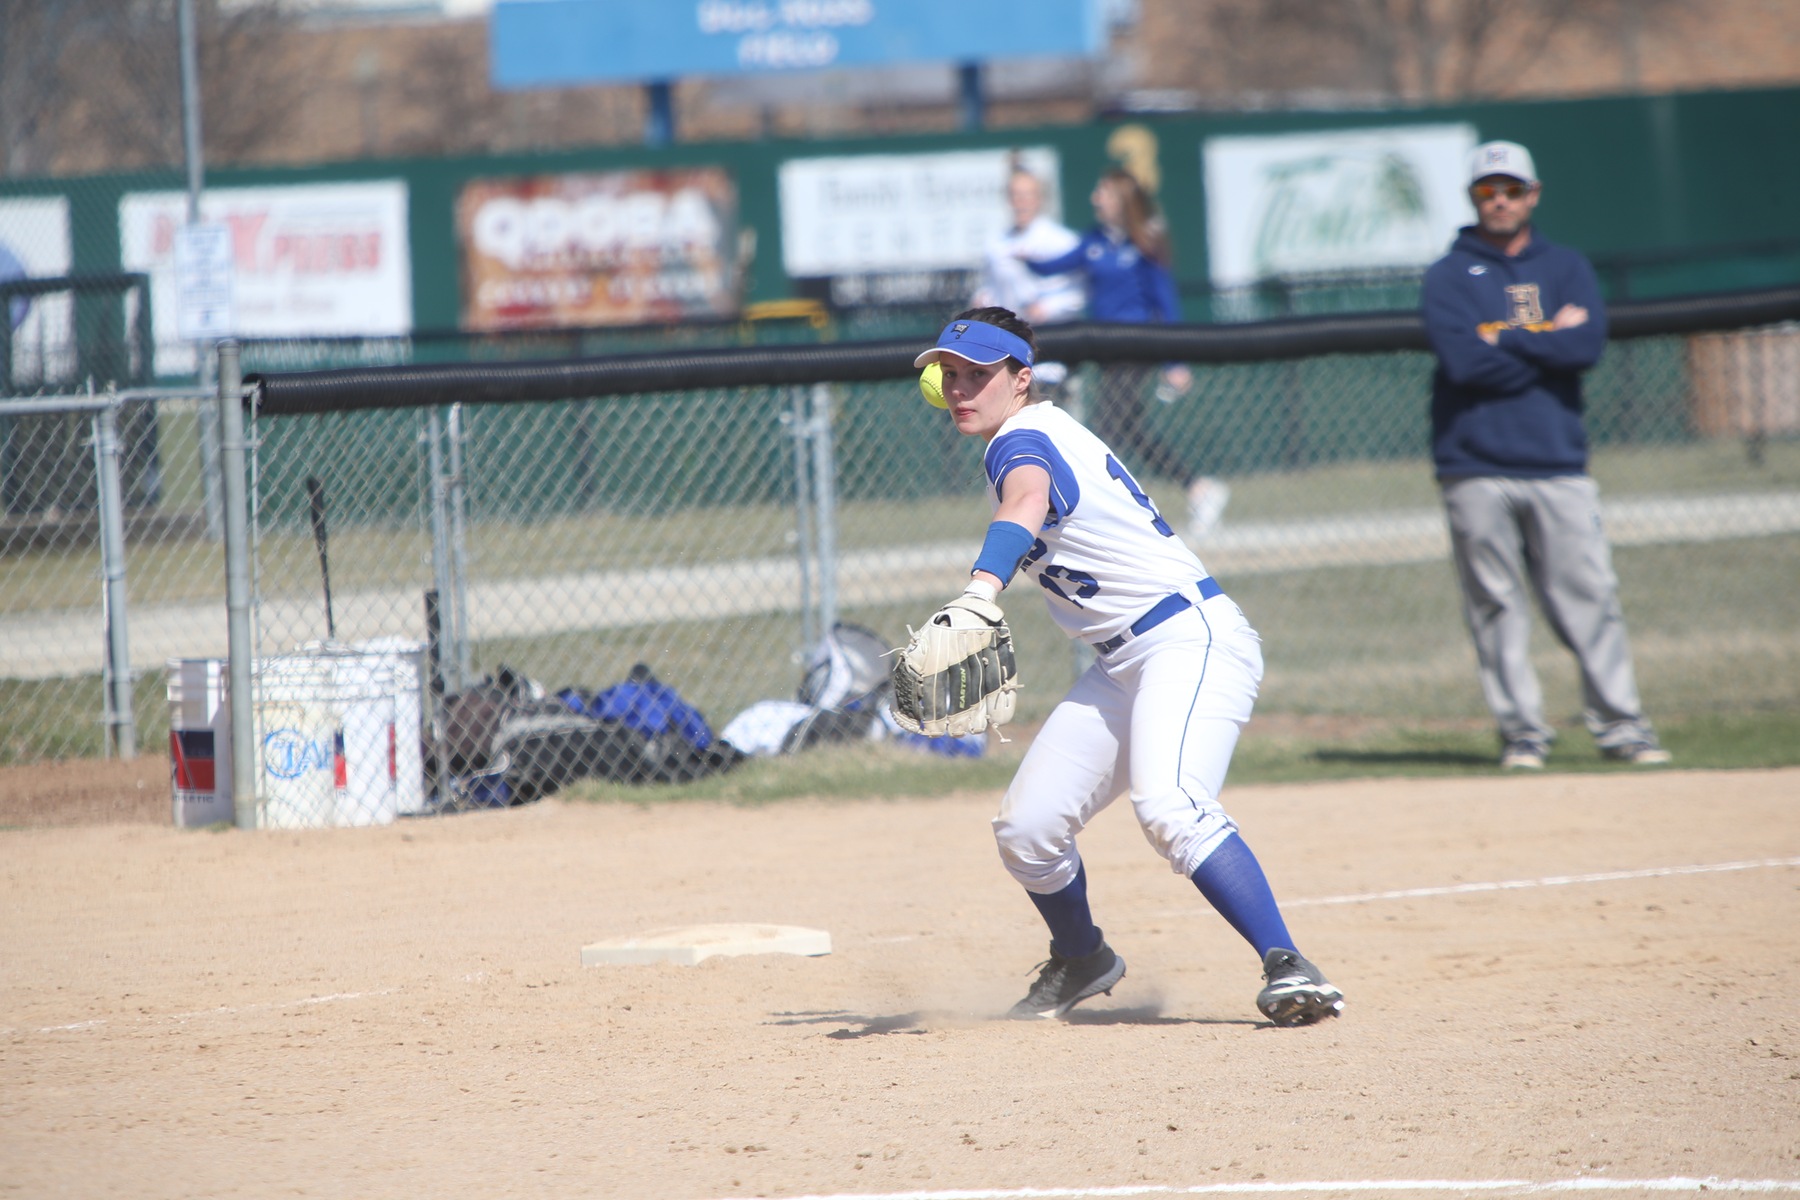 Reivers sweep Marshalltown in Conference opener